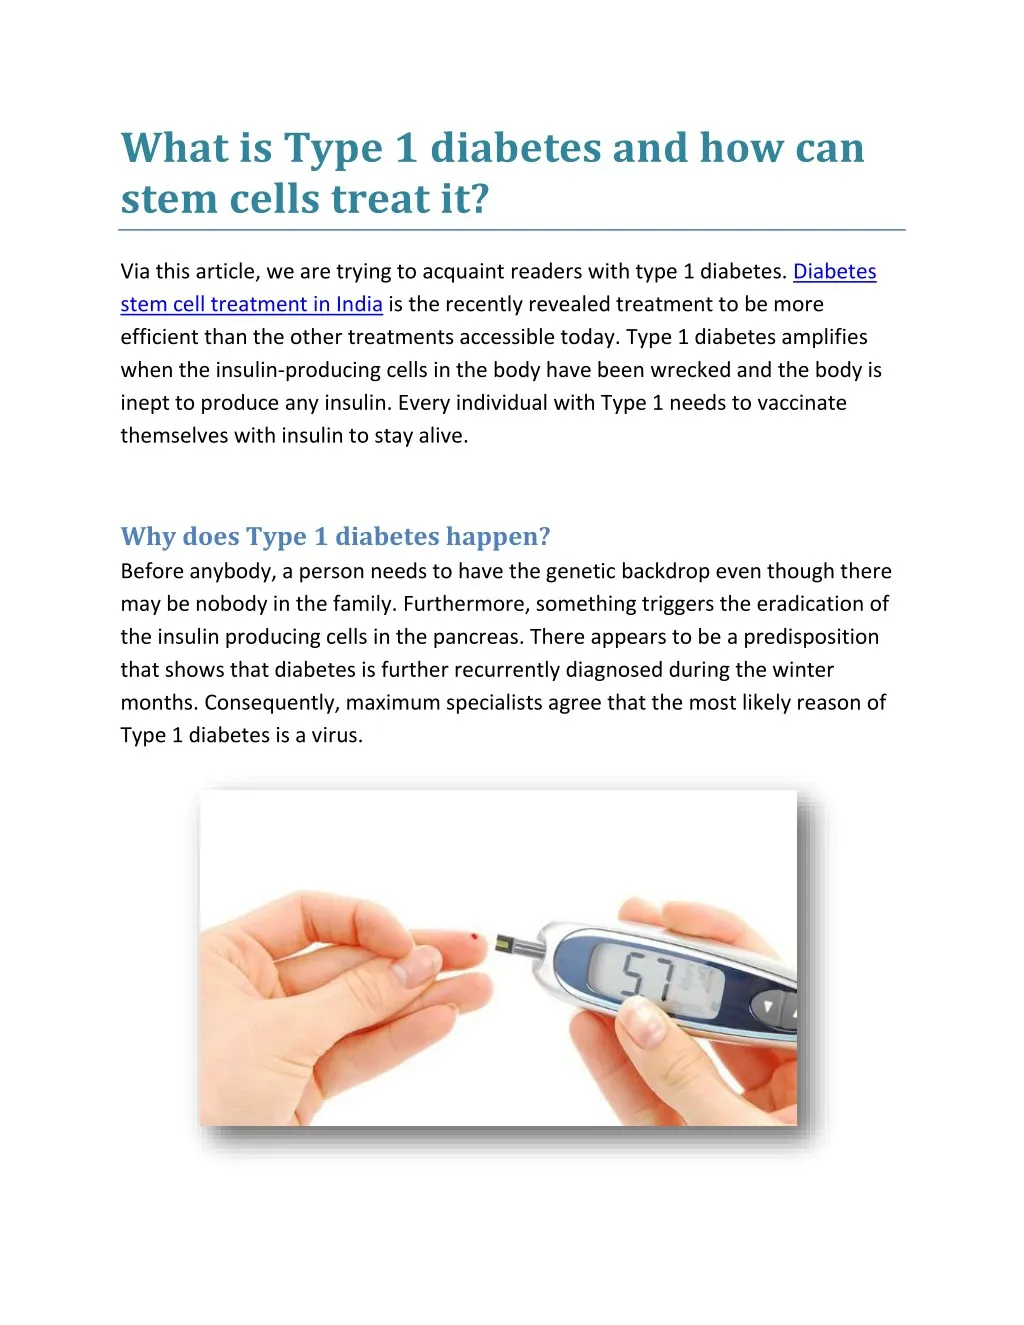 what is type 1 diabetes and how can stem cells